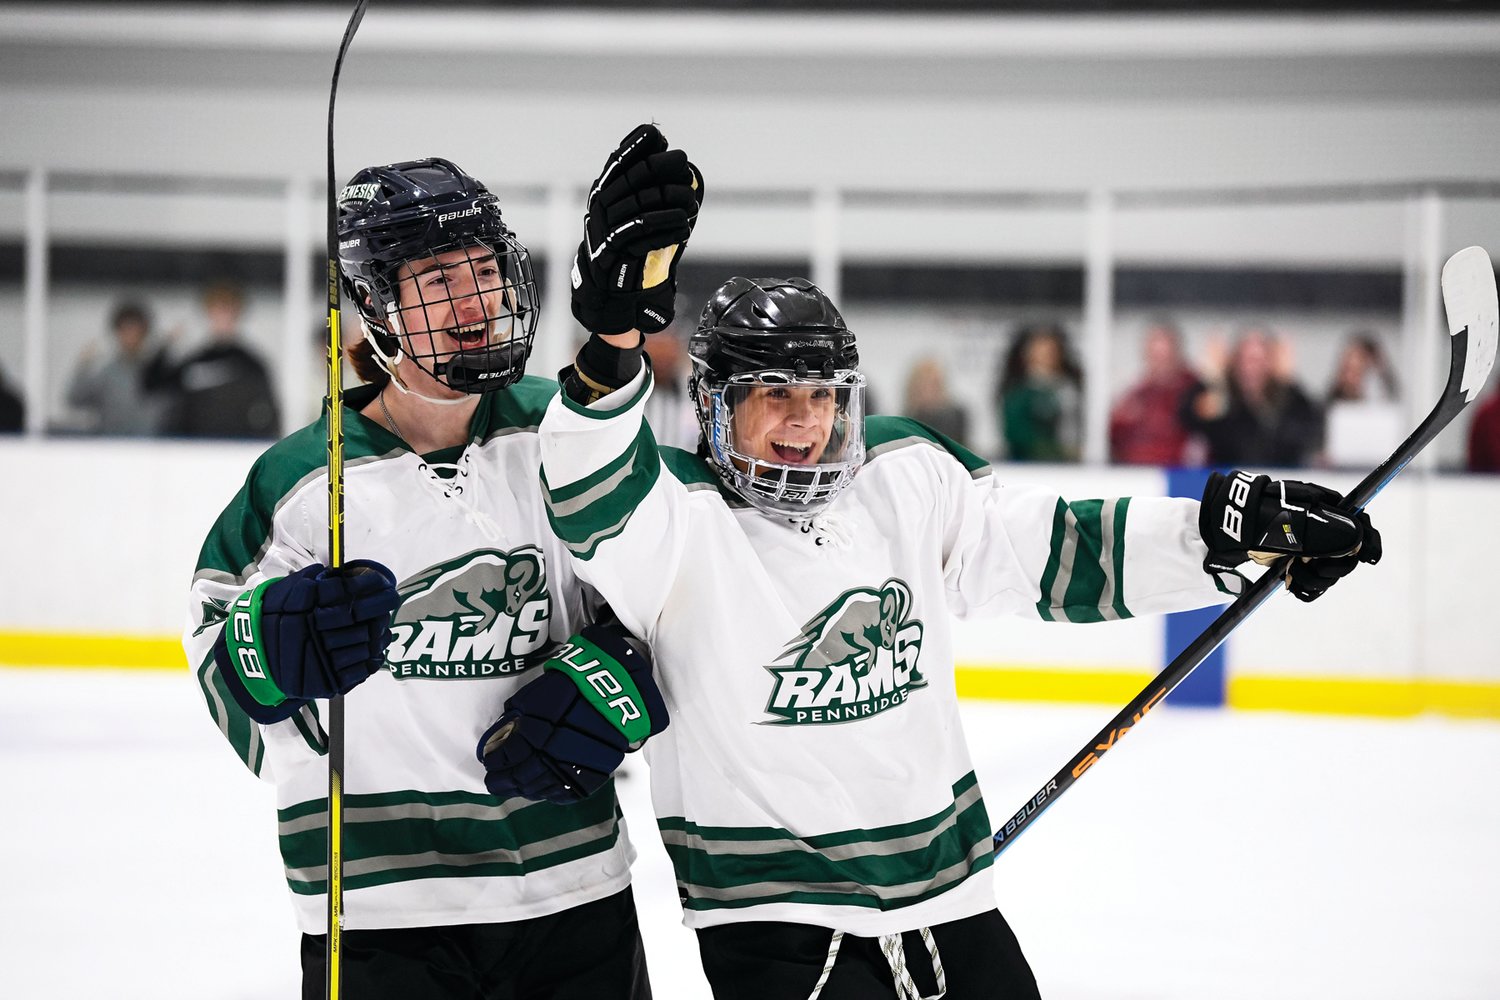 Pennridge’s Tyler Manto celebrates with Nick Young, left, after assisting on the first goal.